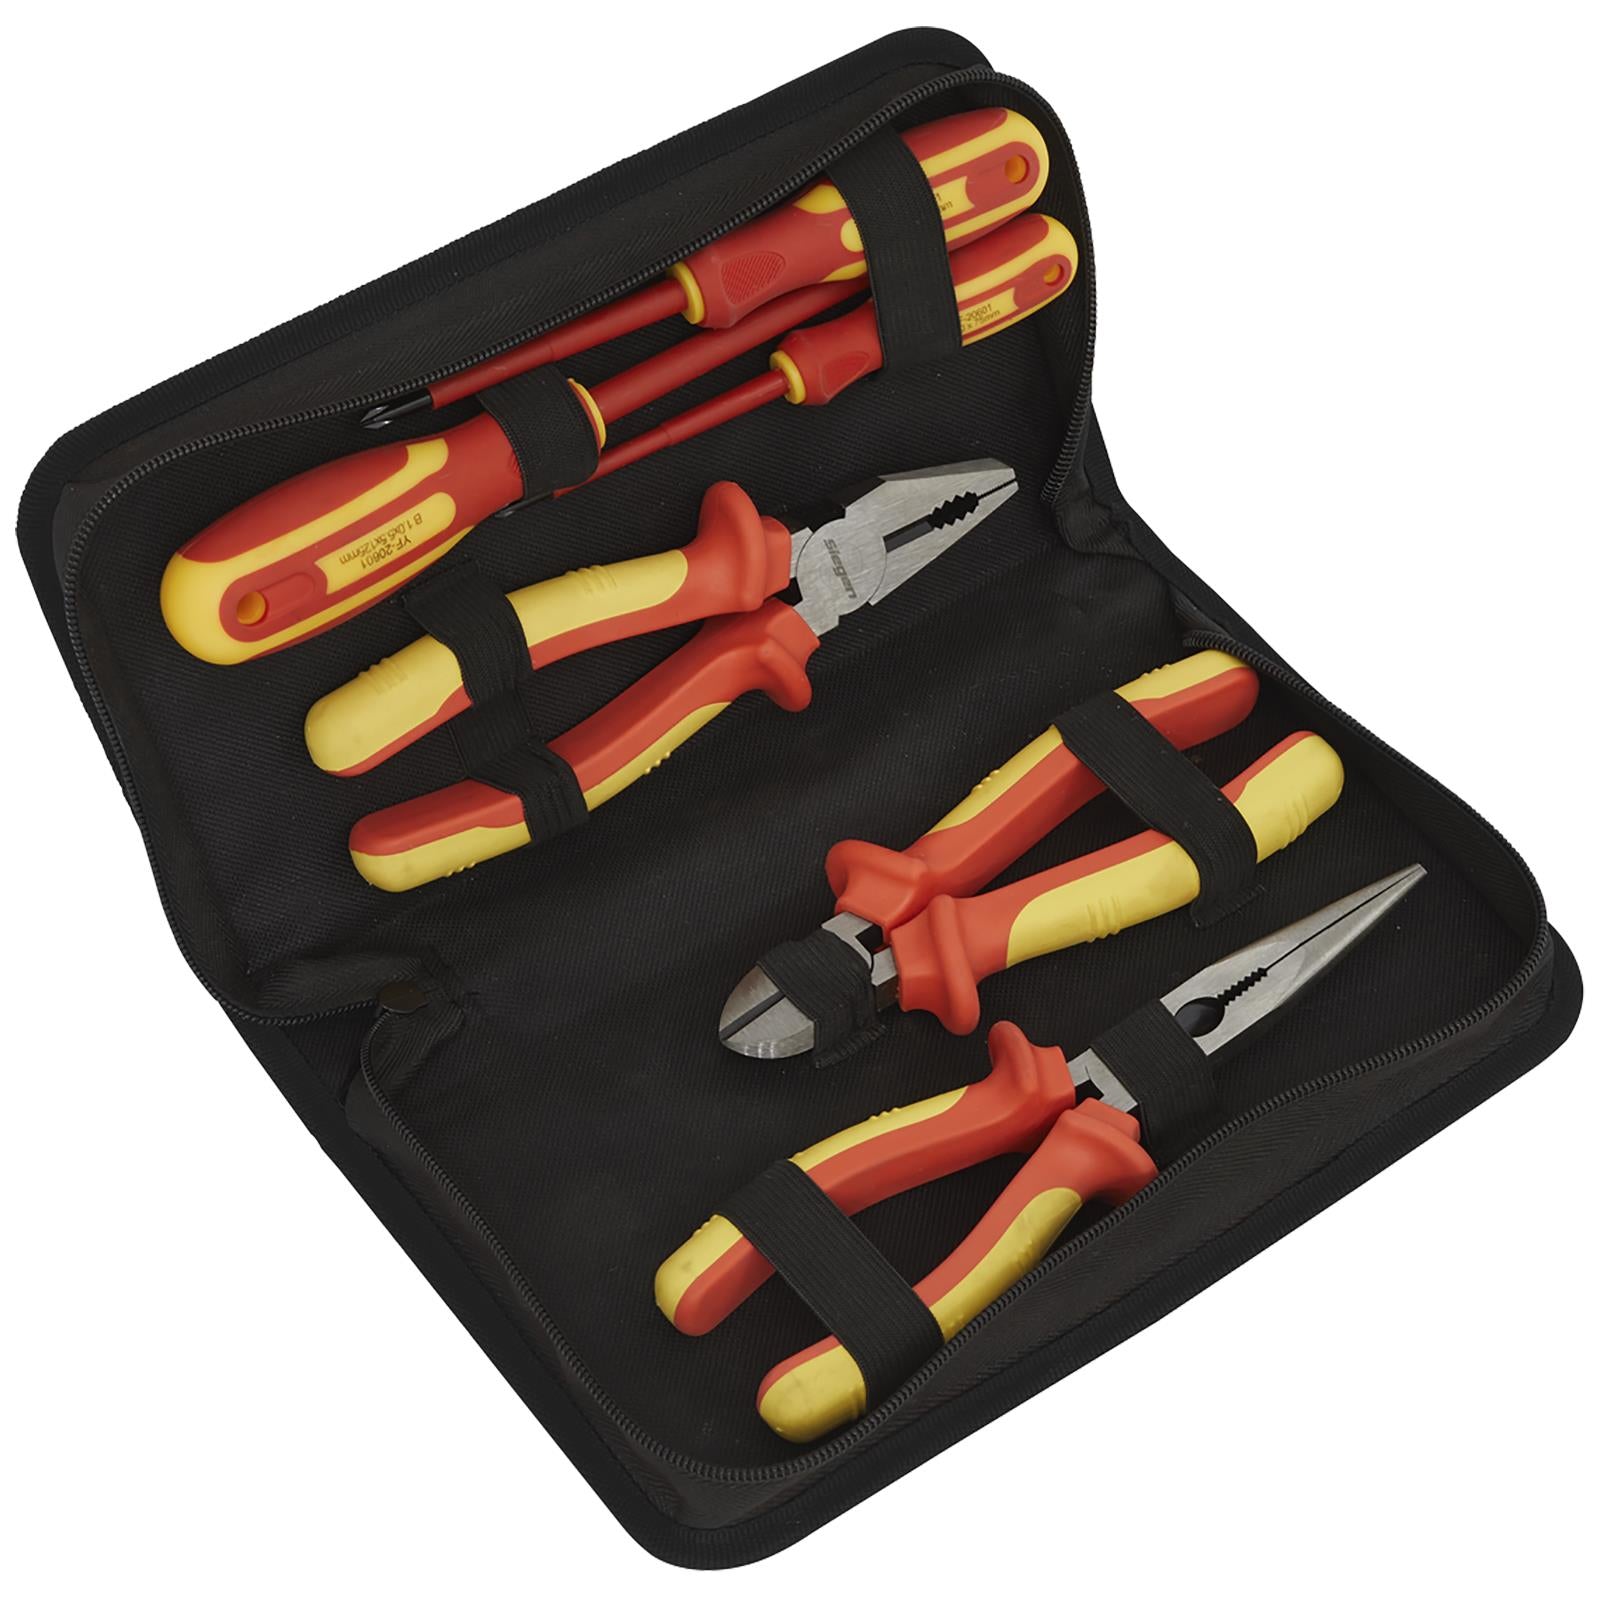 Siegen by Sealey Electrical VDE Tool Set 6 Piece Pliers Screwdrivers